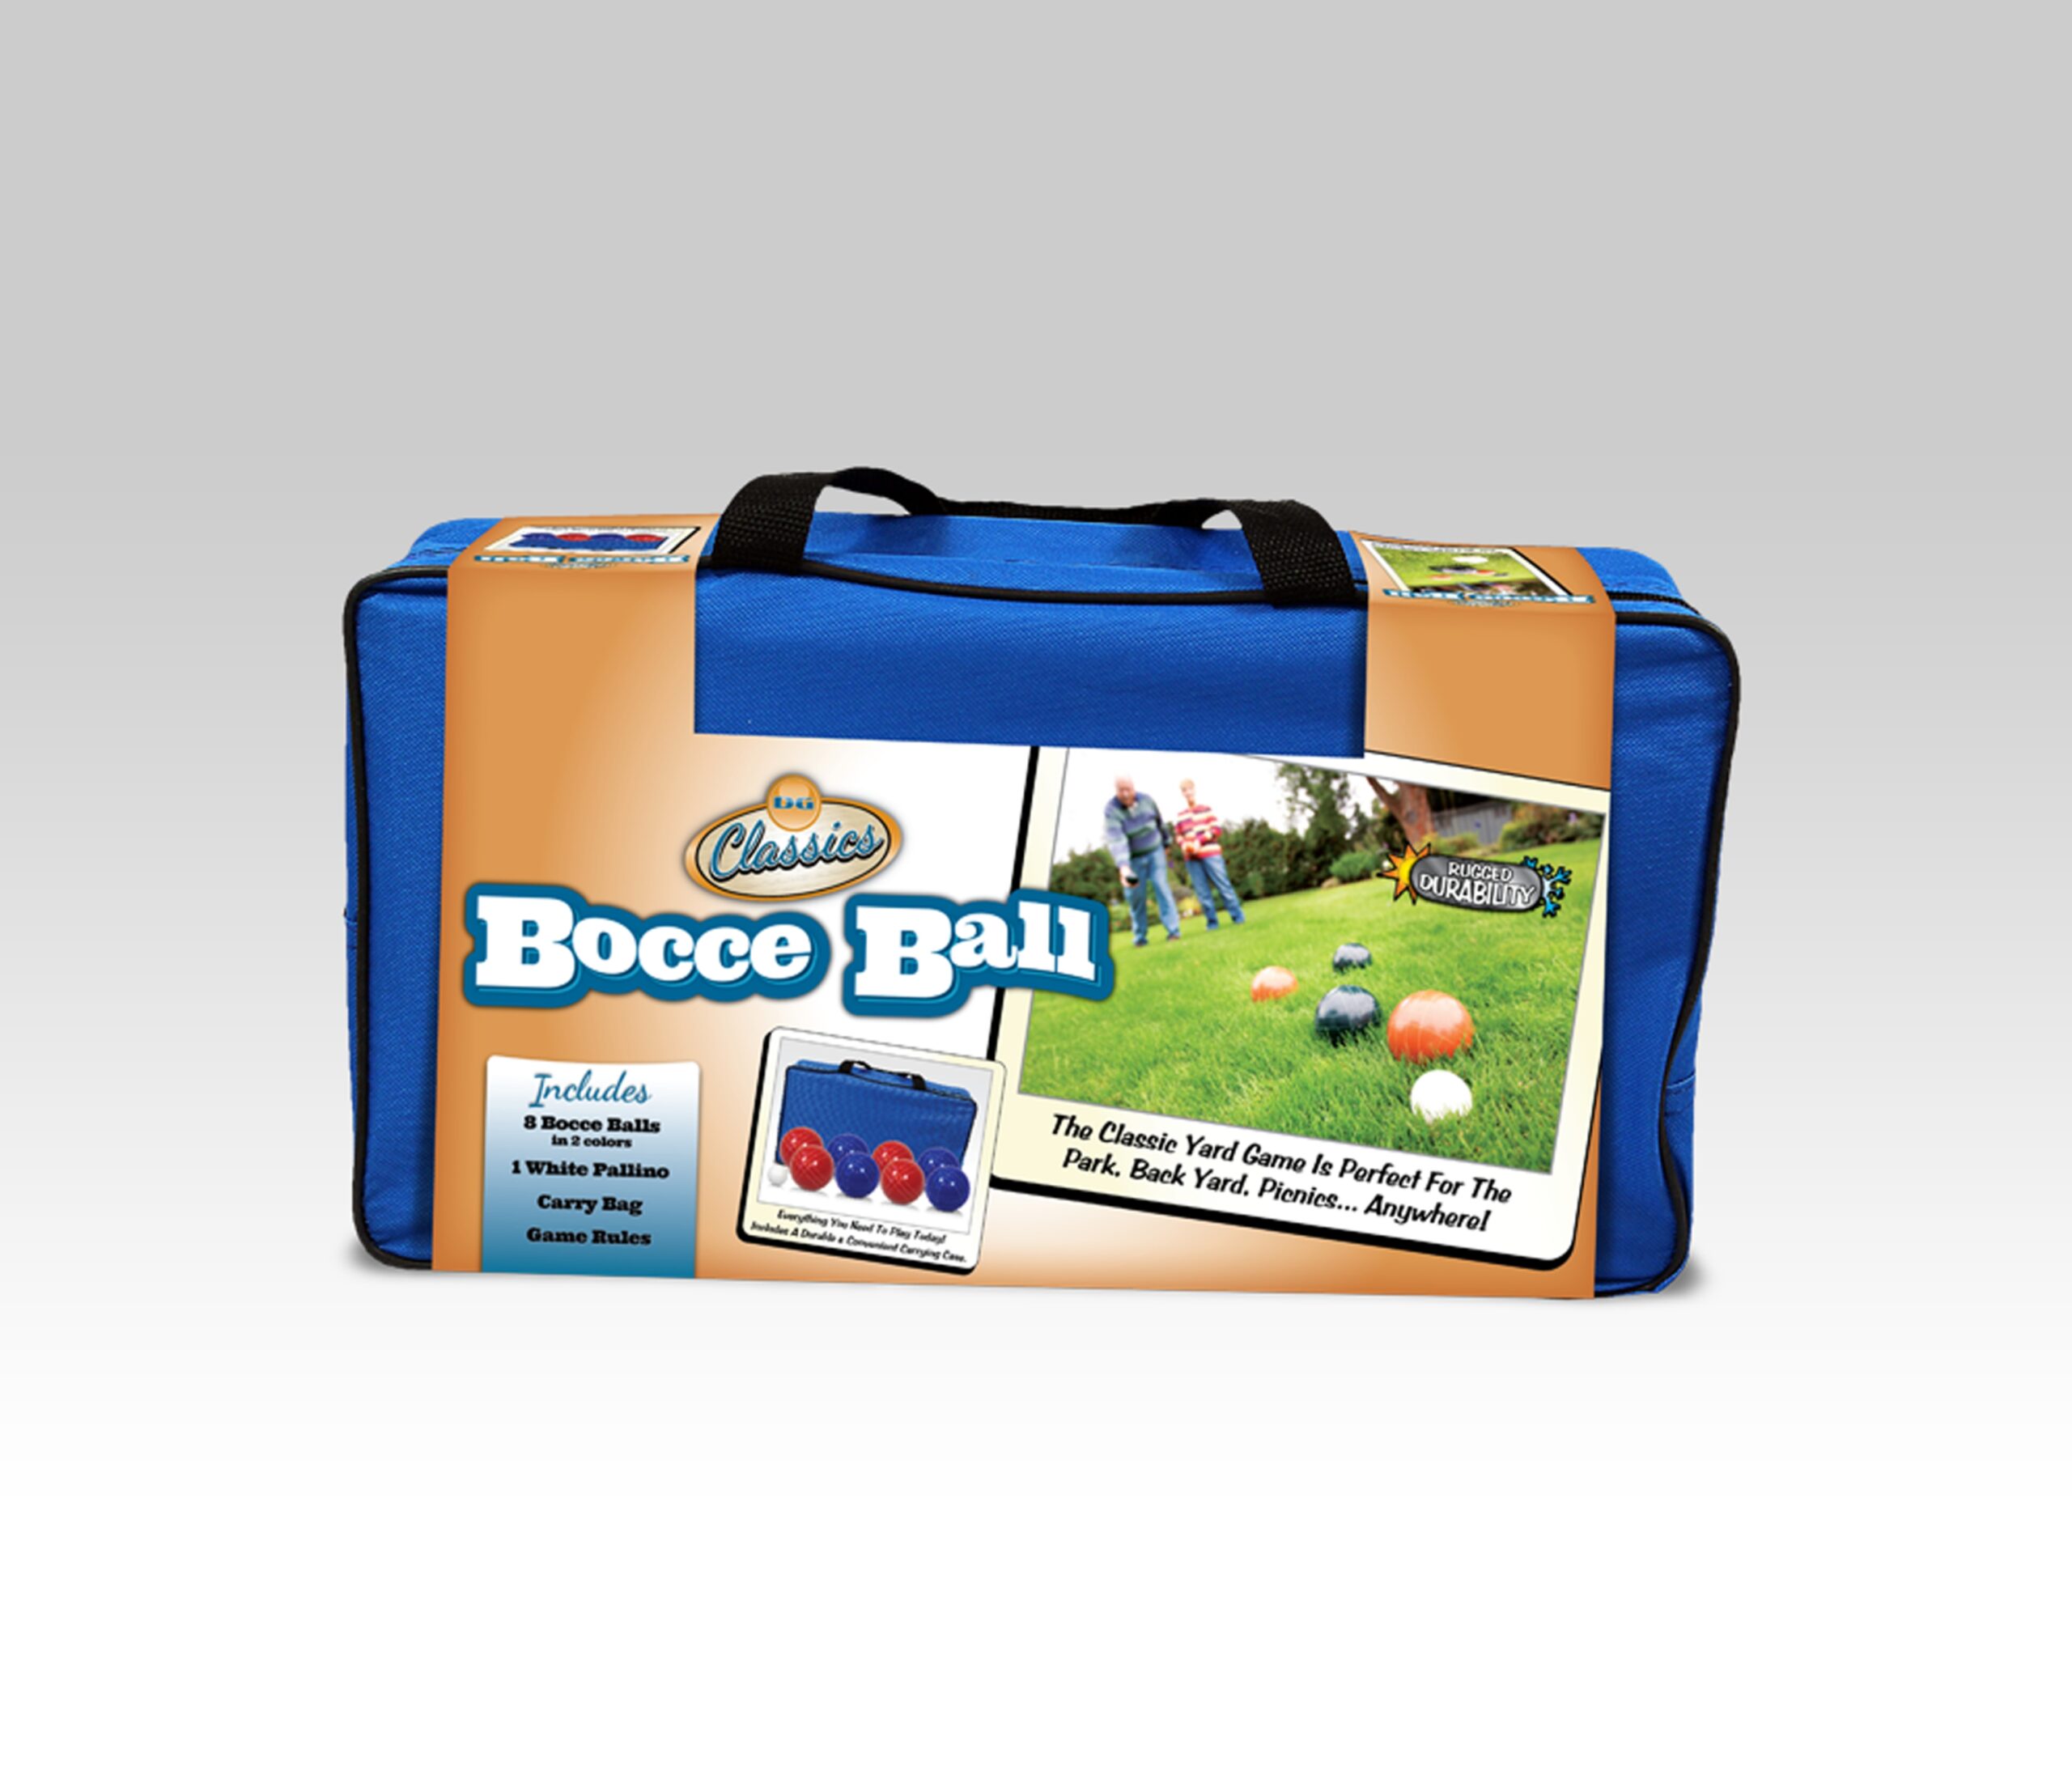 Brand Shepherd Case Study Driveway Games Bocce Ball scaled